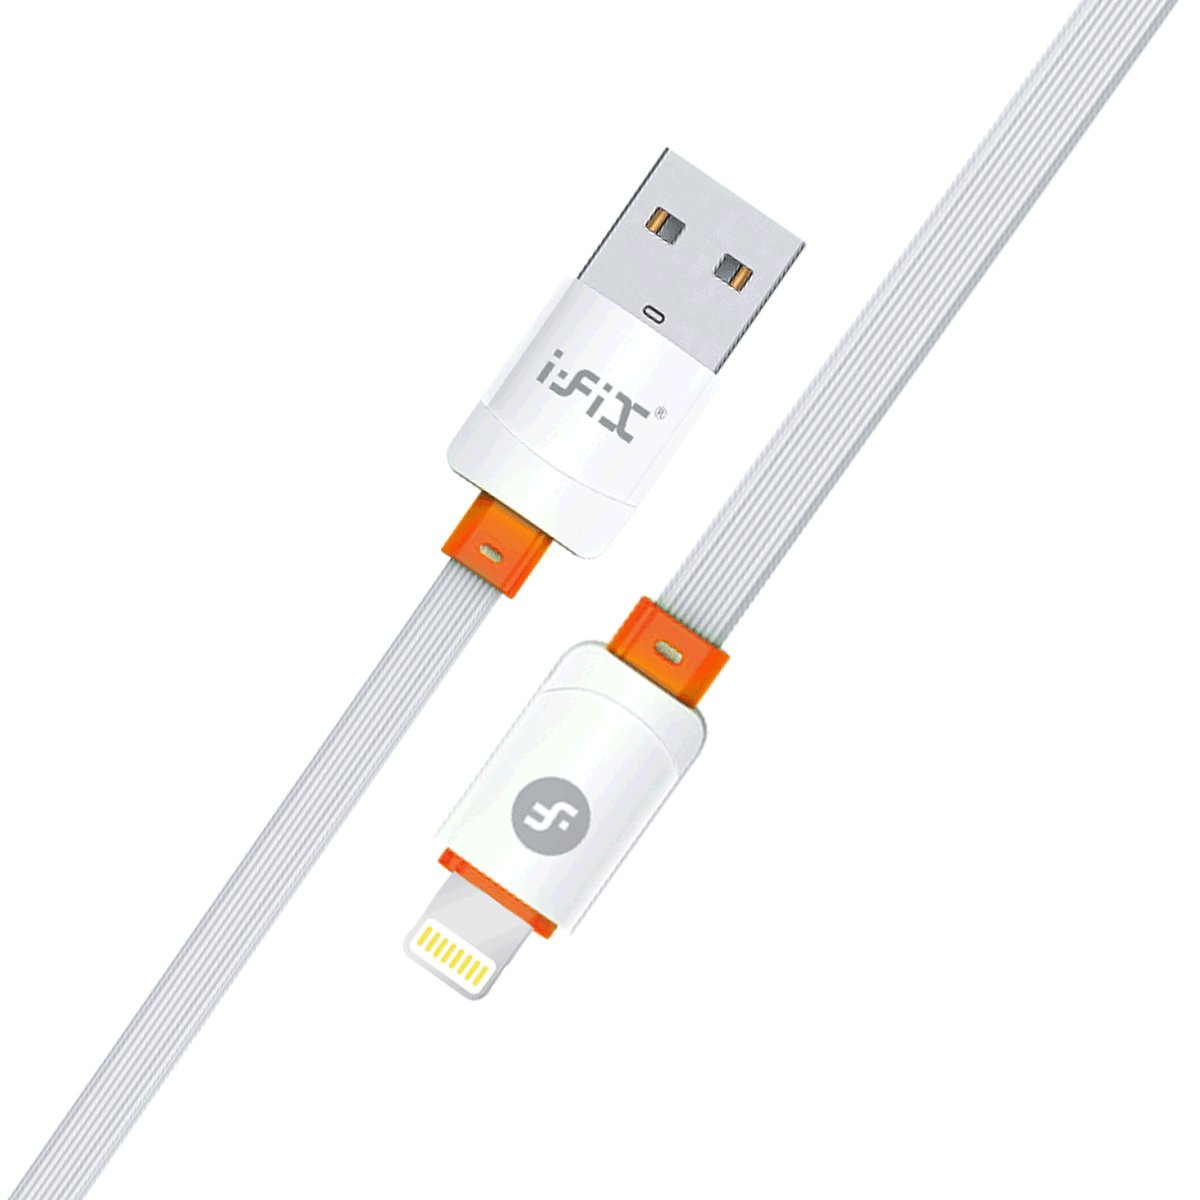 IF-02 Lightning 3.4A Fast Charging USB Data Cable( White & Red)